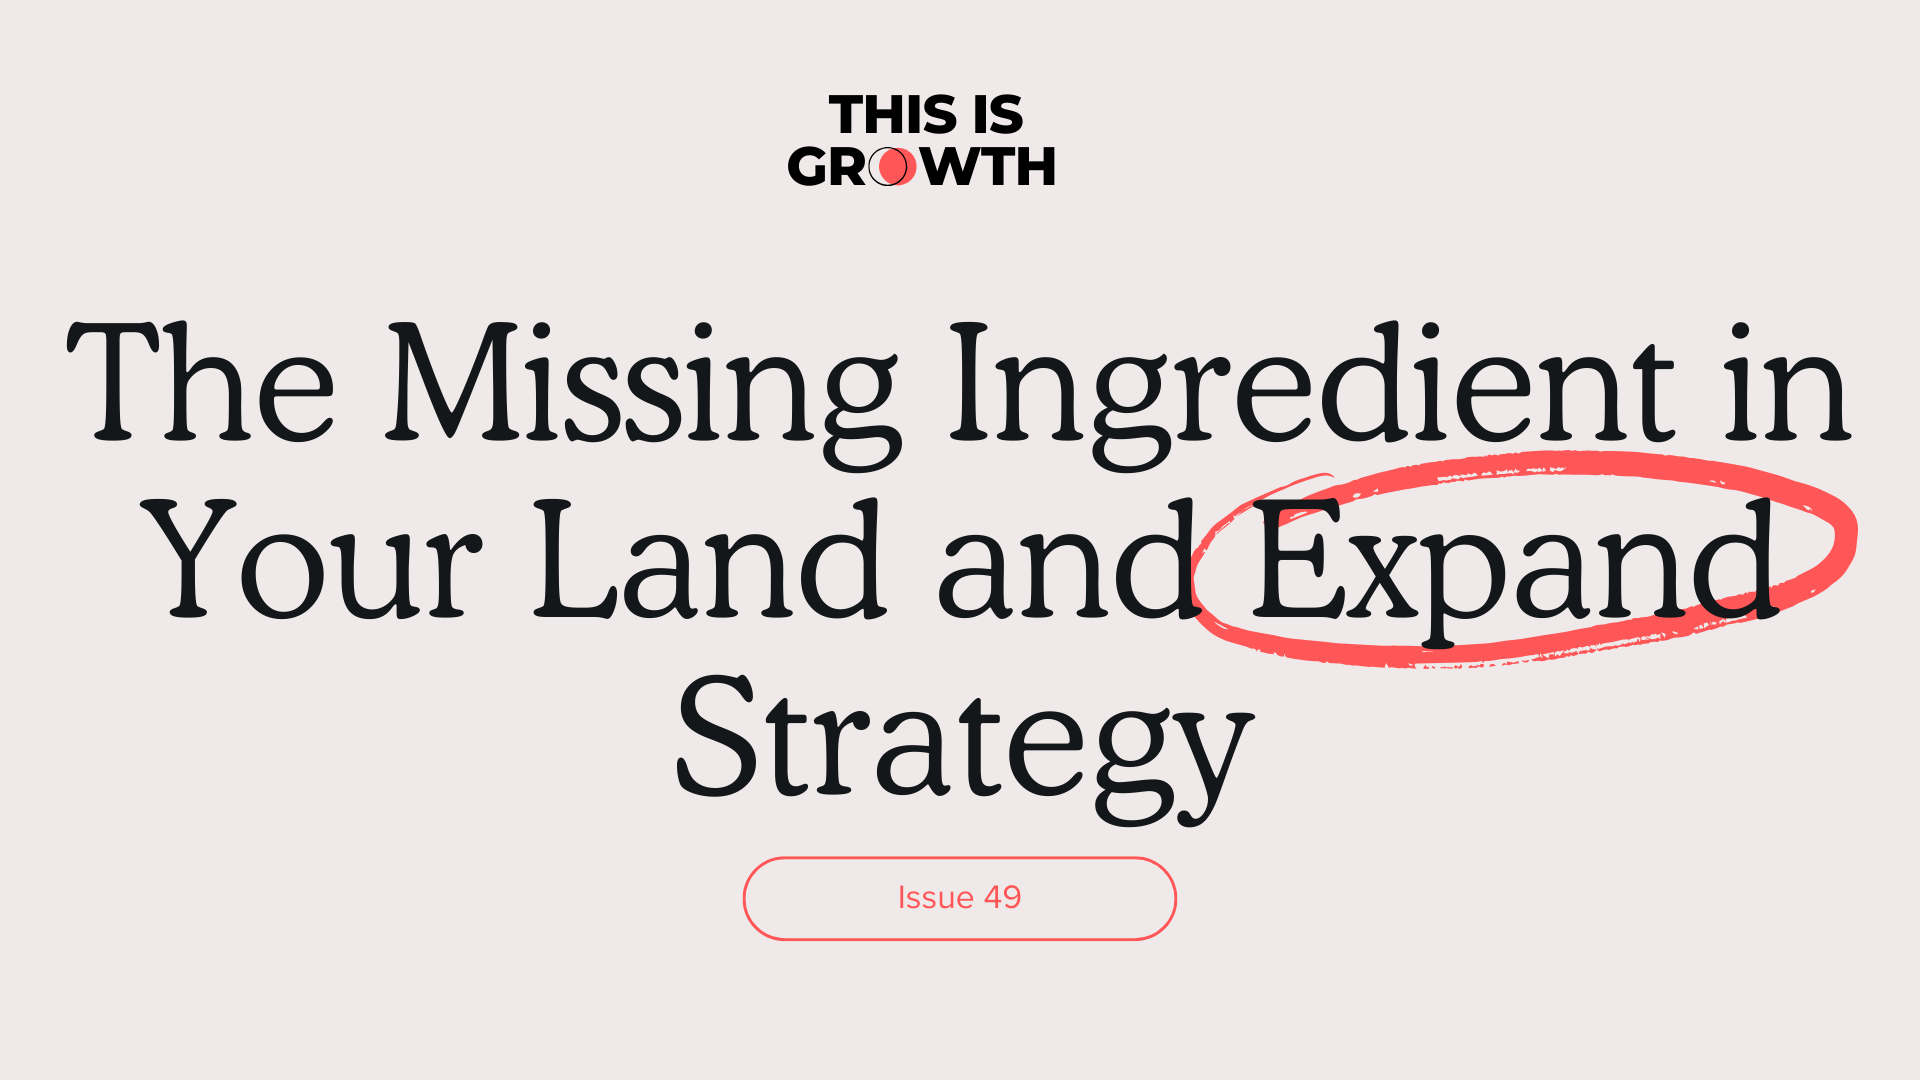 The Missing Ingredient in Your Land and Expand Strategy